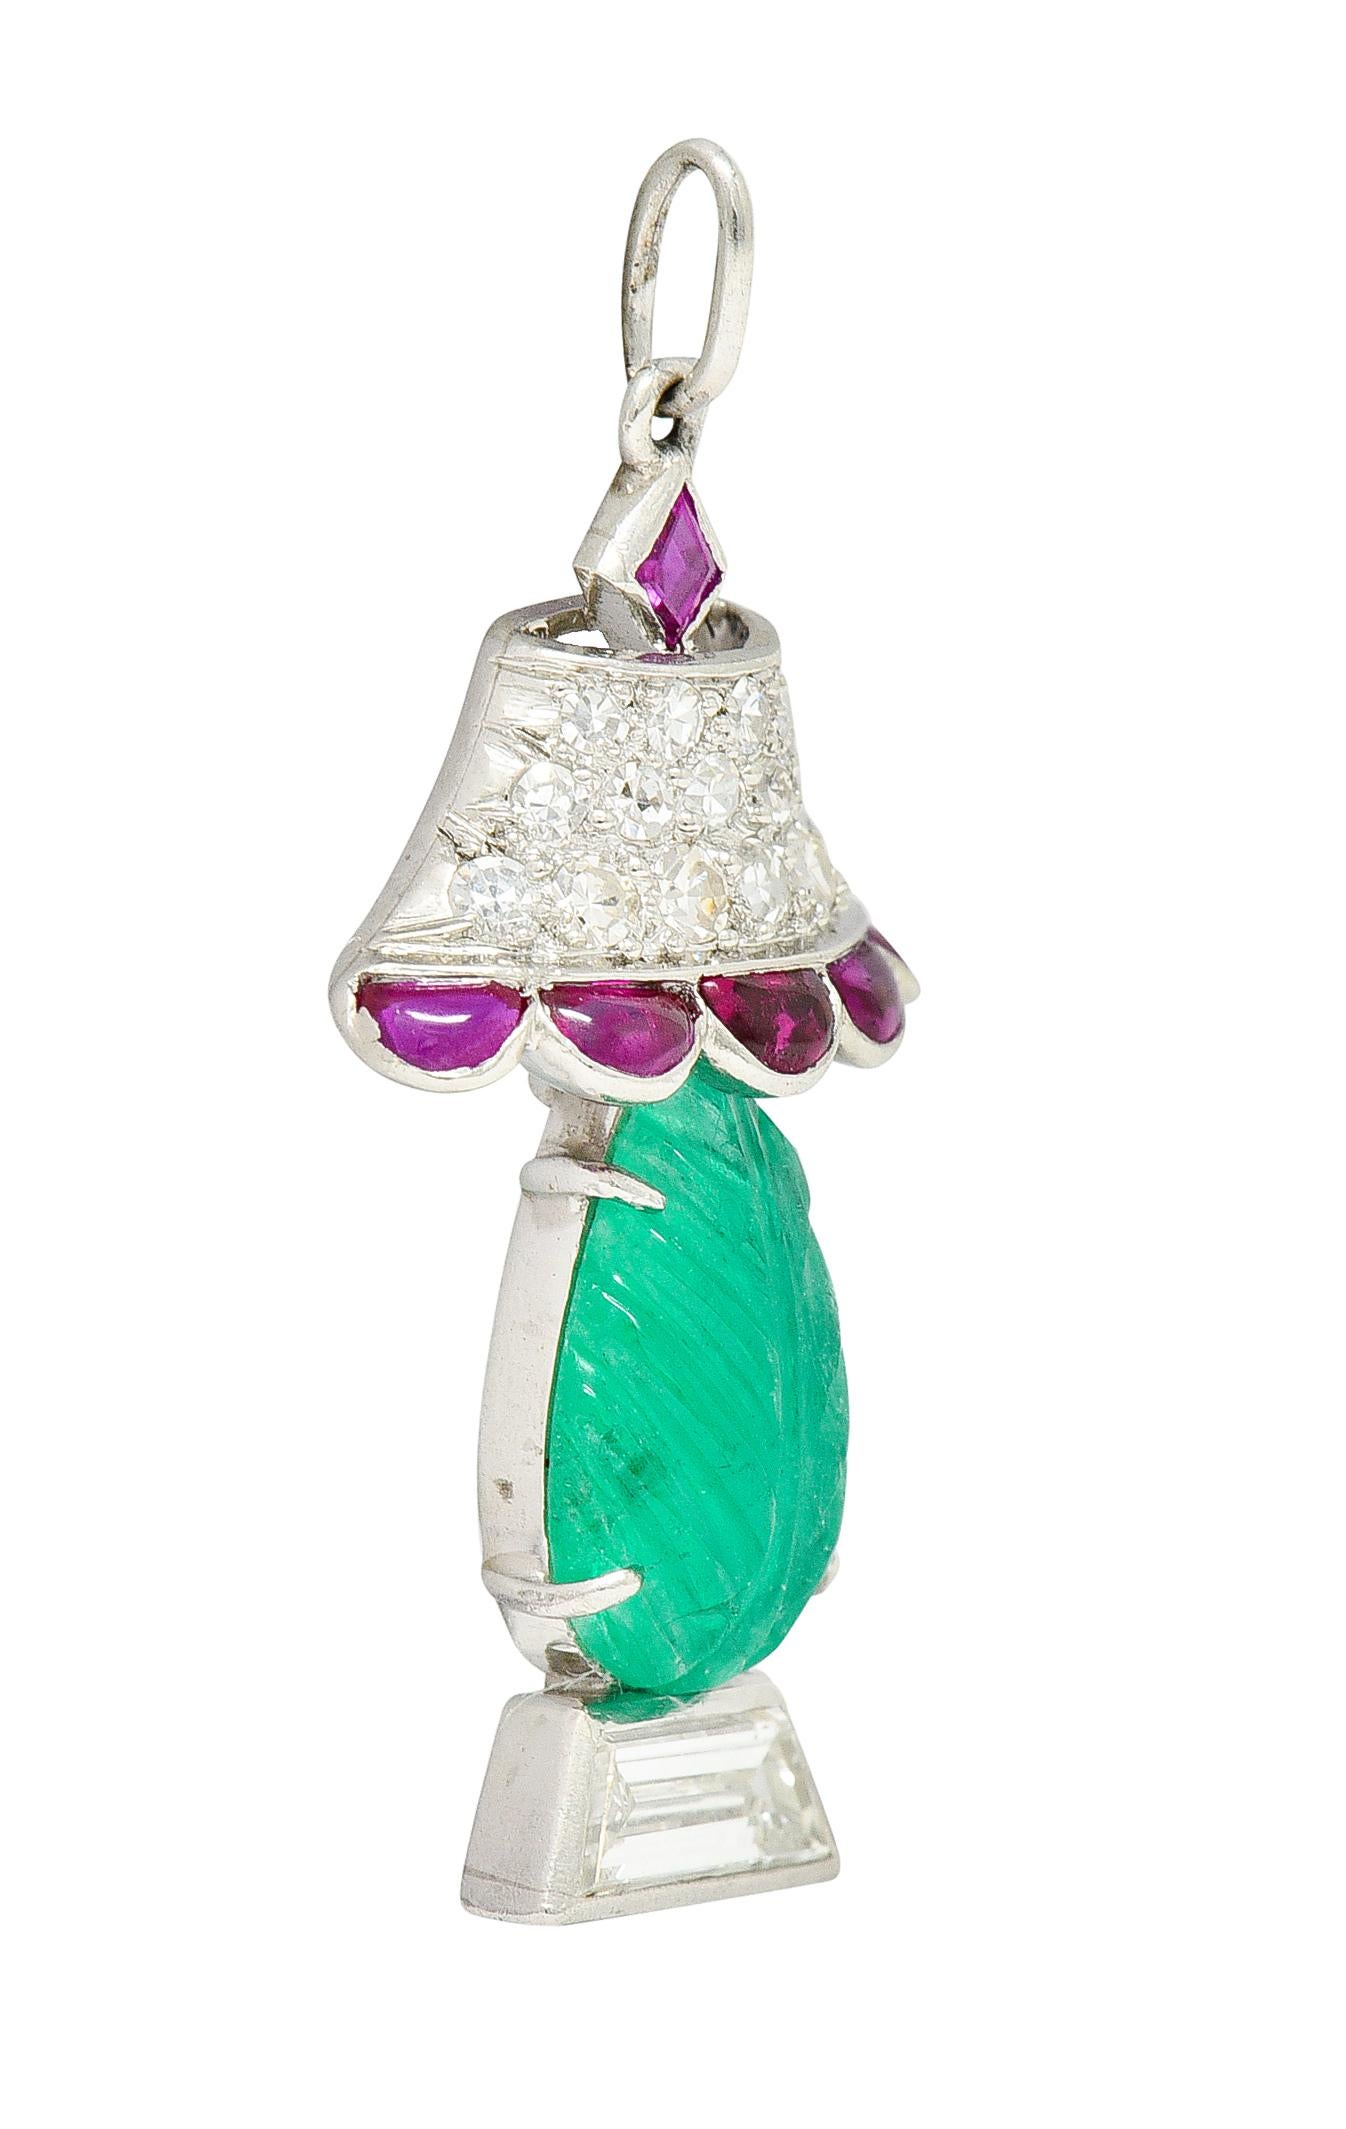 Charm is designed as a lamp with a Mughal carved emerald as body. Translucent bluish green and carved to depict foliate while weighing approximately 1.00 carat. Lampshade is pavè set with single cut diamonds while base is a trapezoid cut diamond.